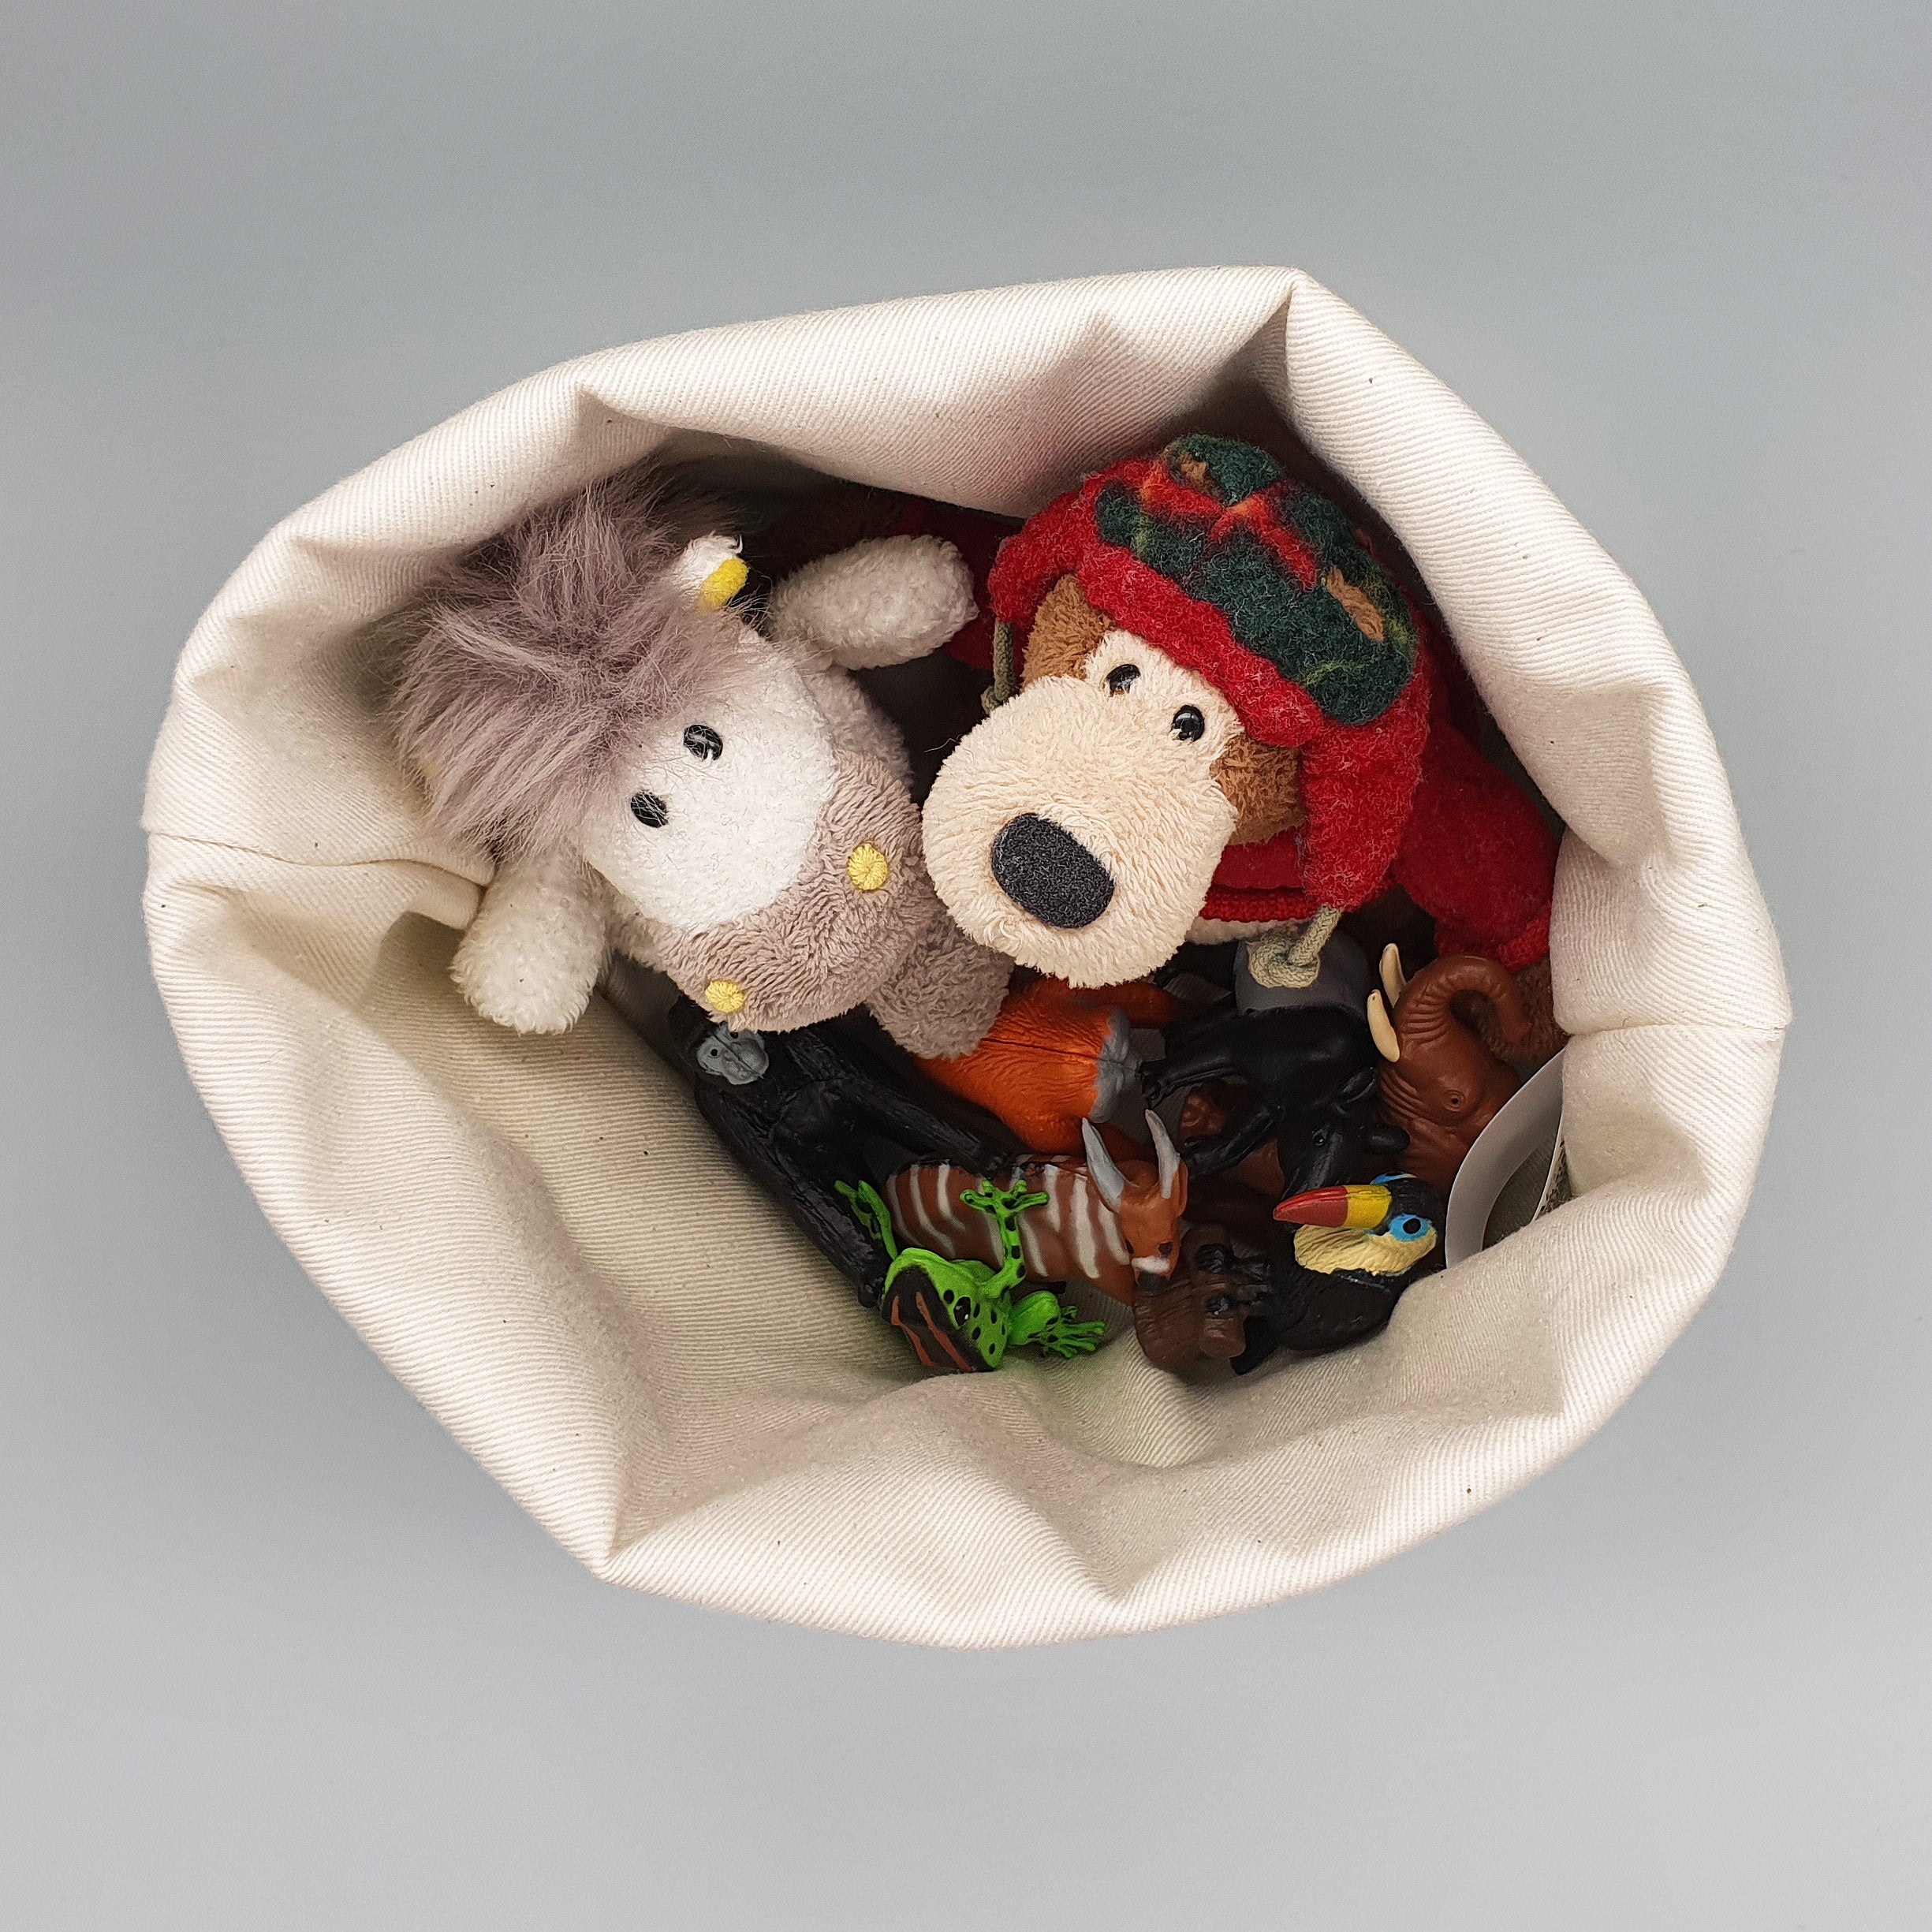 Cats fabric storage basket shown storing toys